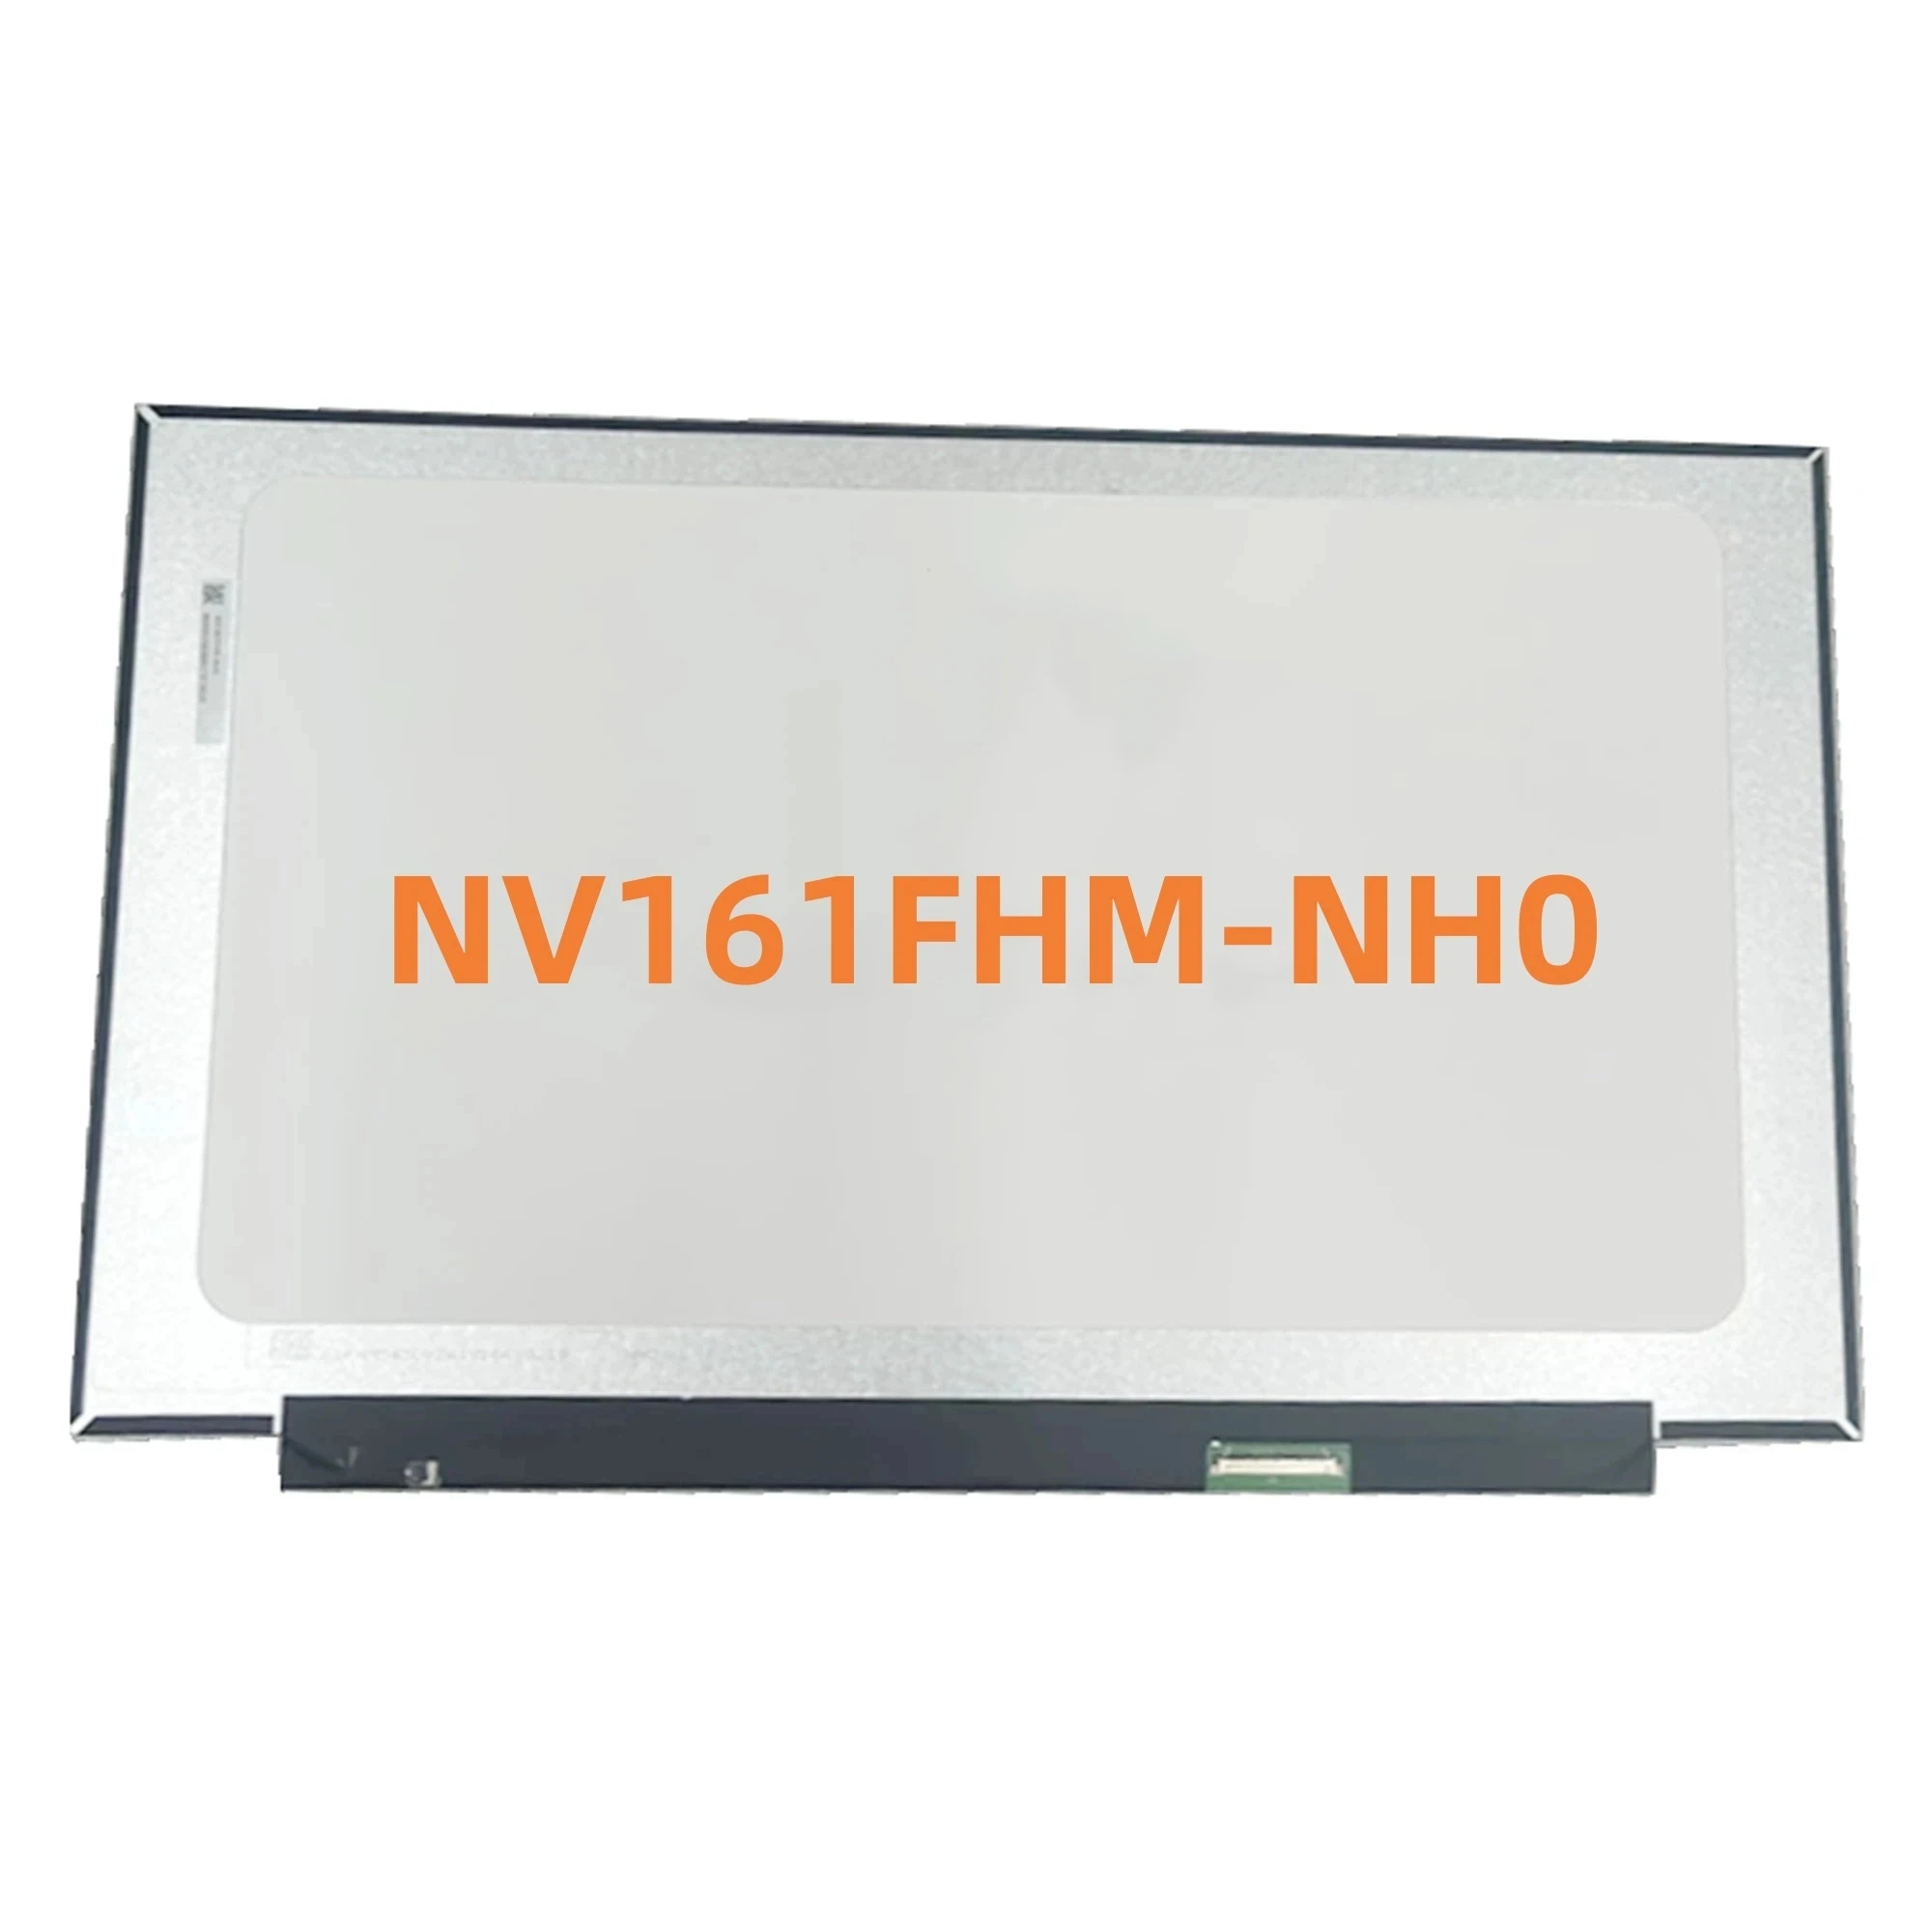 

NV161FHM-NH0 144hz 40pin 100% sRGB for Huawei Honor Hunter Gaming Notebook V700 notebook LCD screen replacement